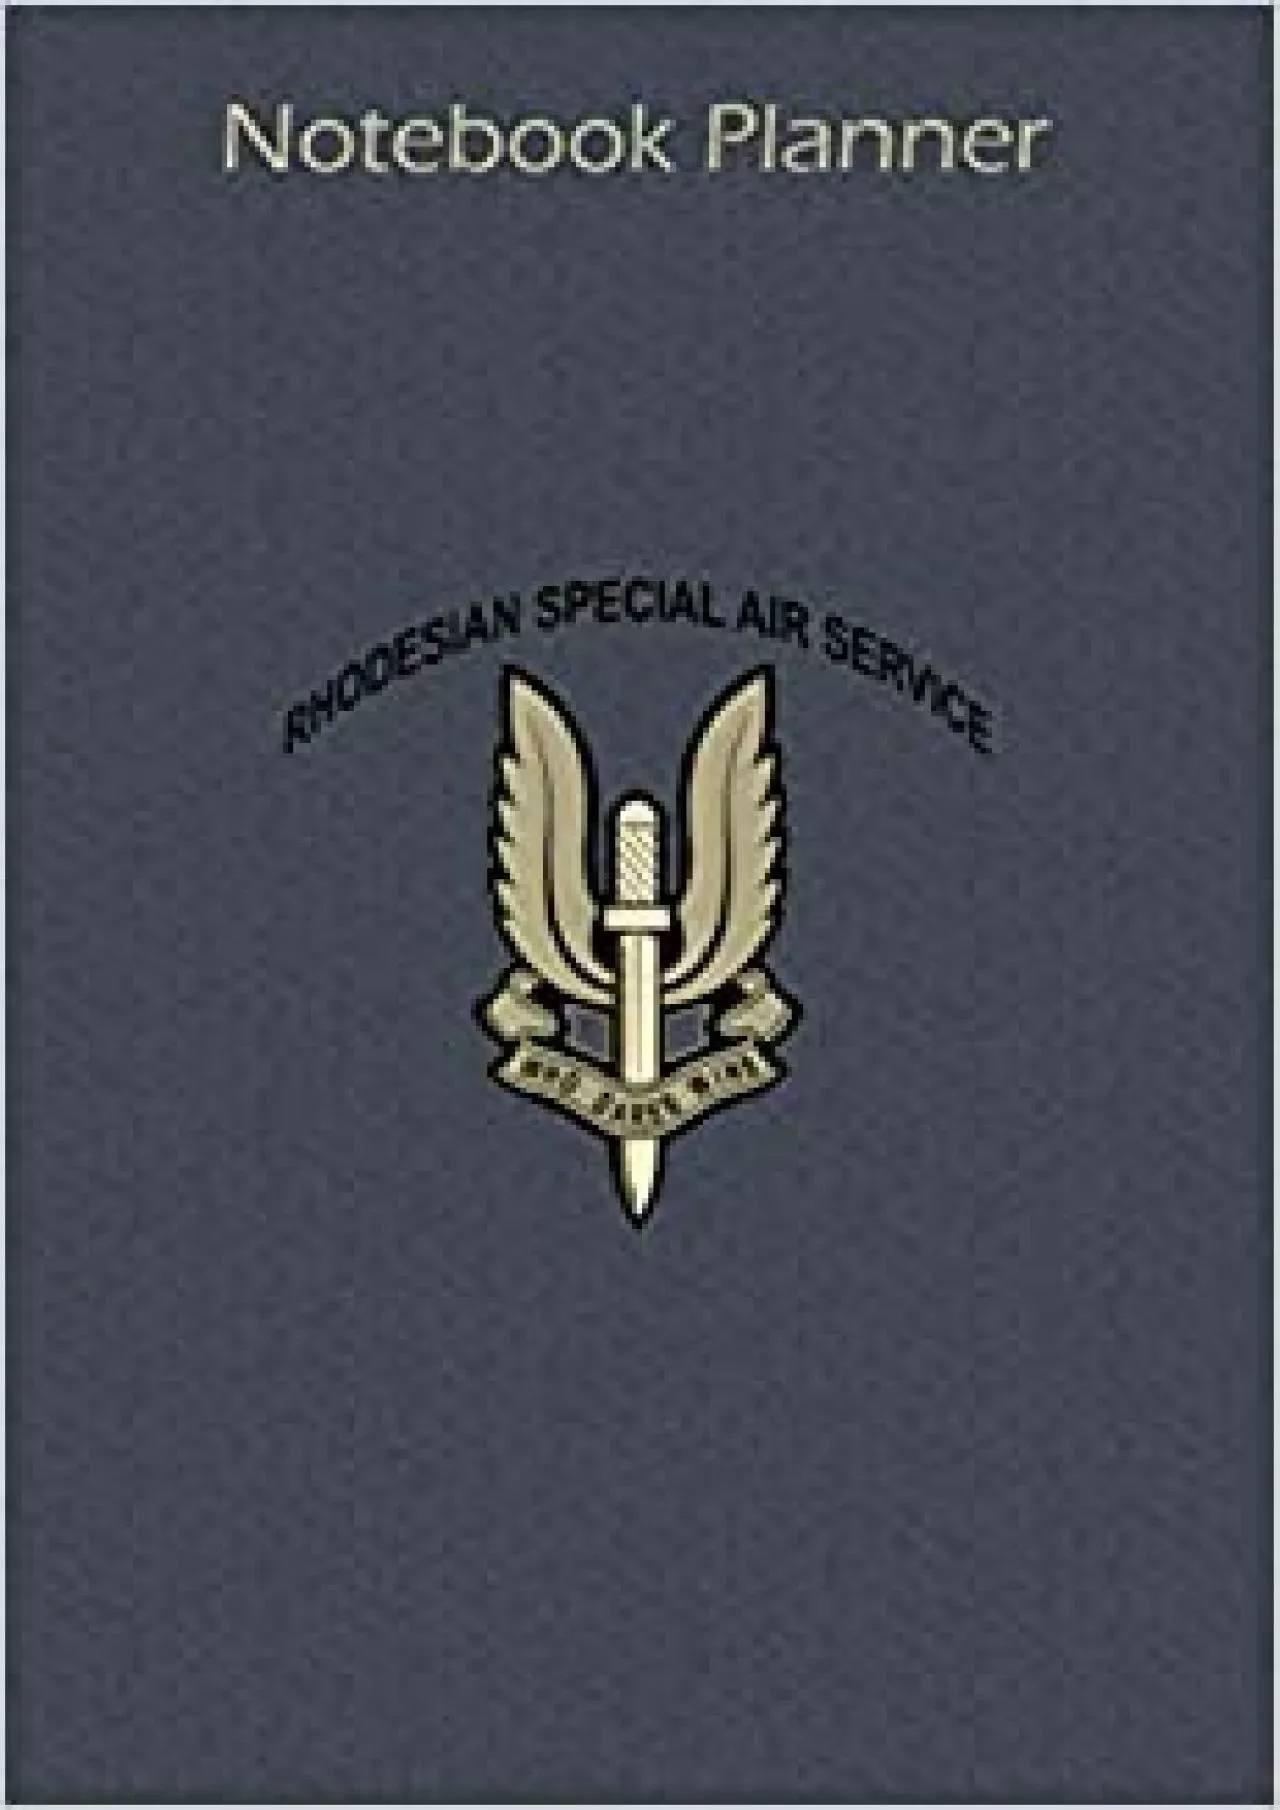 Notebook Planner Rhodesian Special Air Service SAS: Pocket 6x9 inch Notebook Planner To